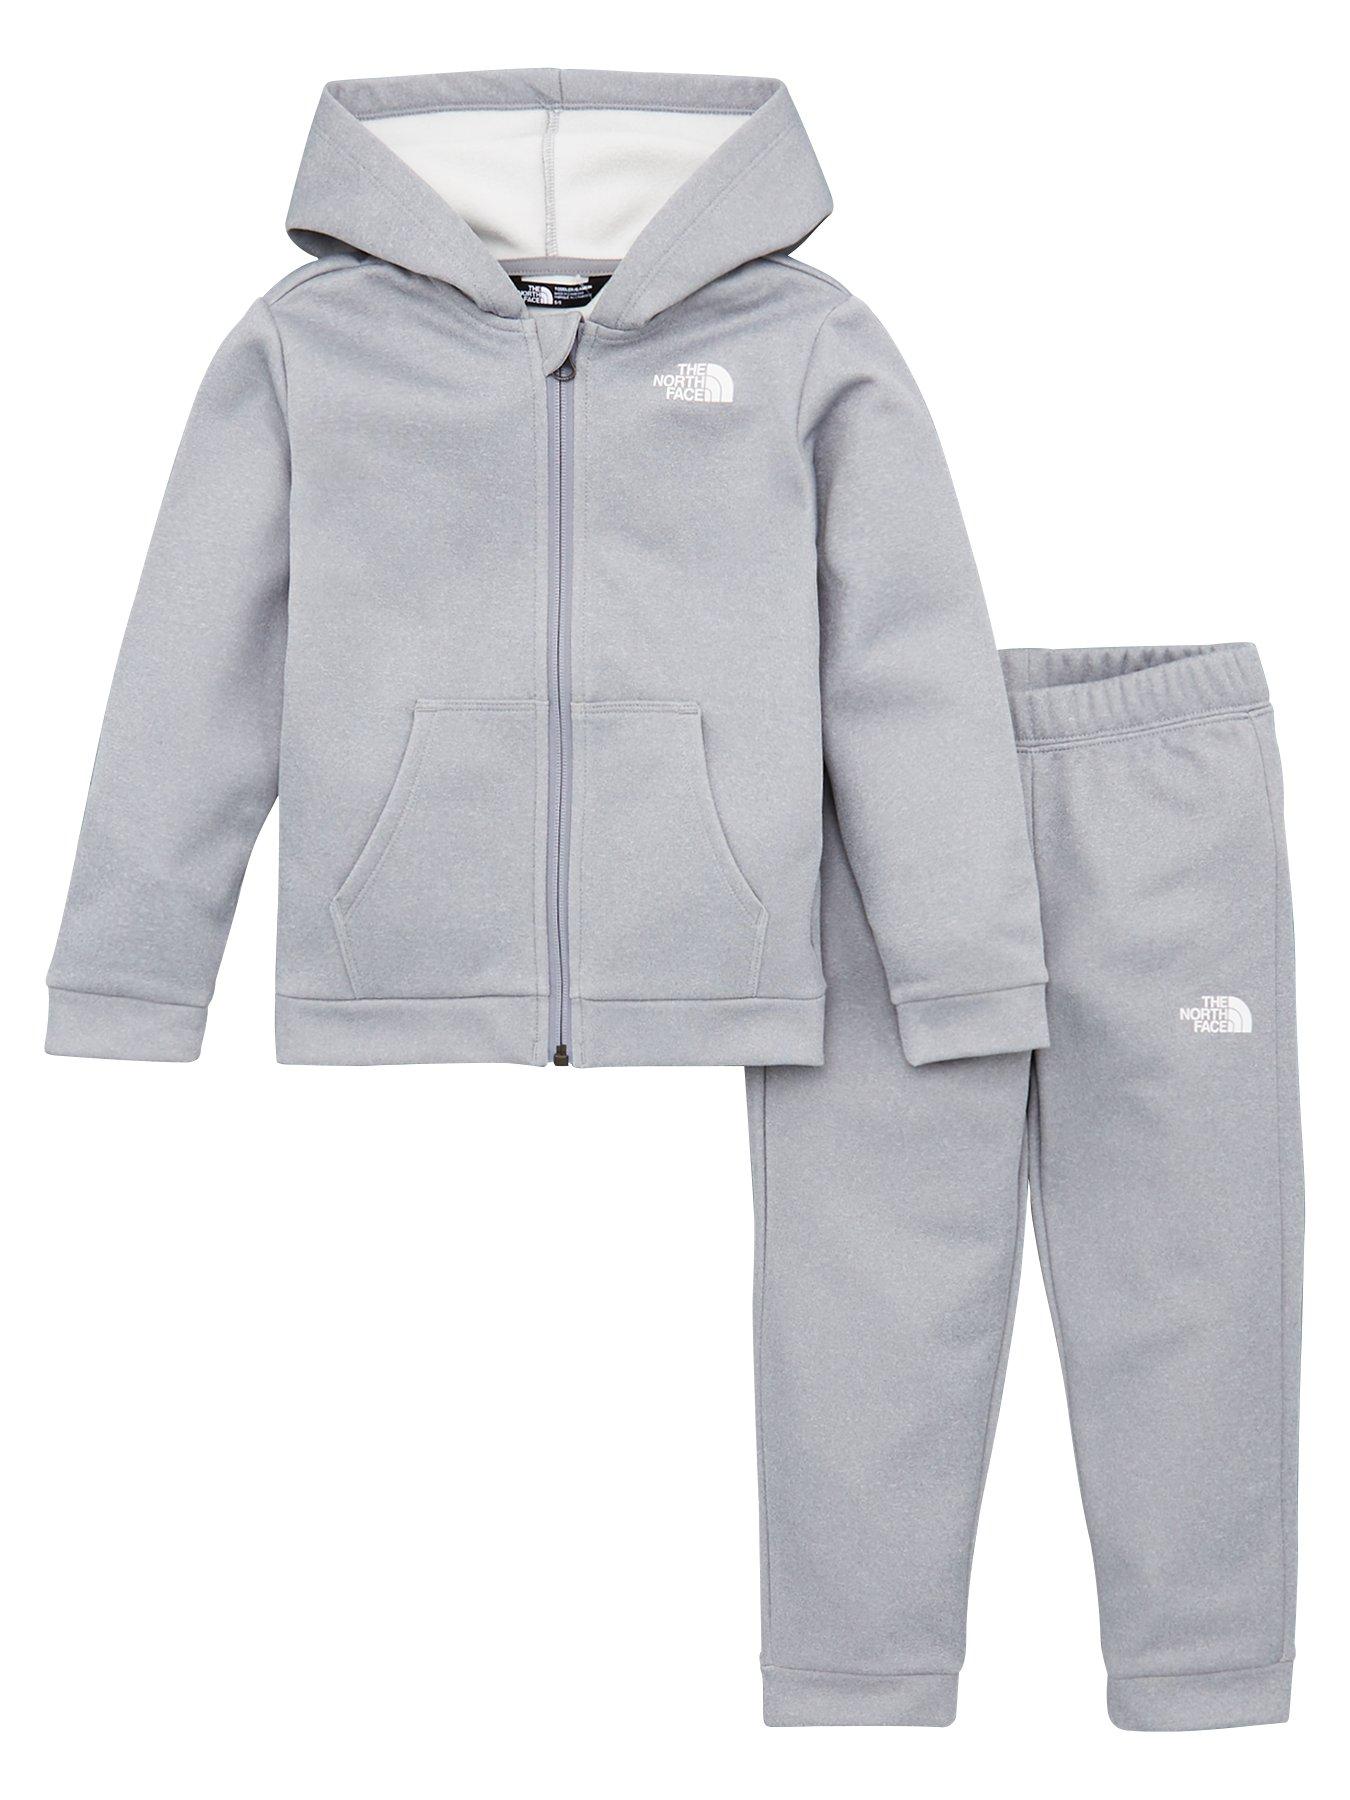 grey face heather tracksuit hooded surgent toddler boys north very